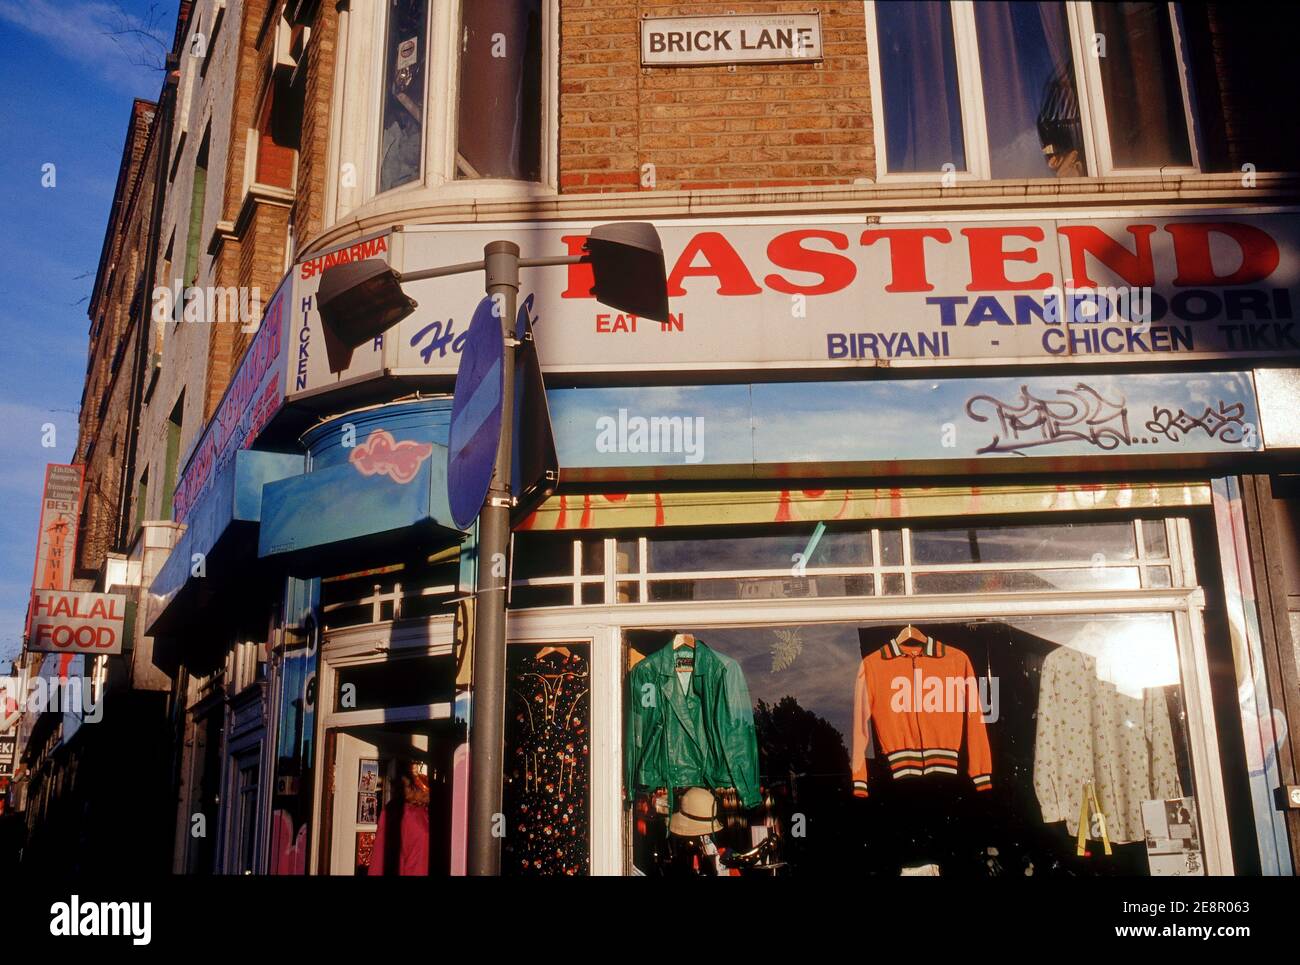 Brik Lane second hand shop in the trendy area in East London, Uk Stock Photo